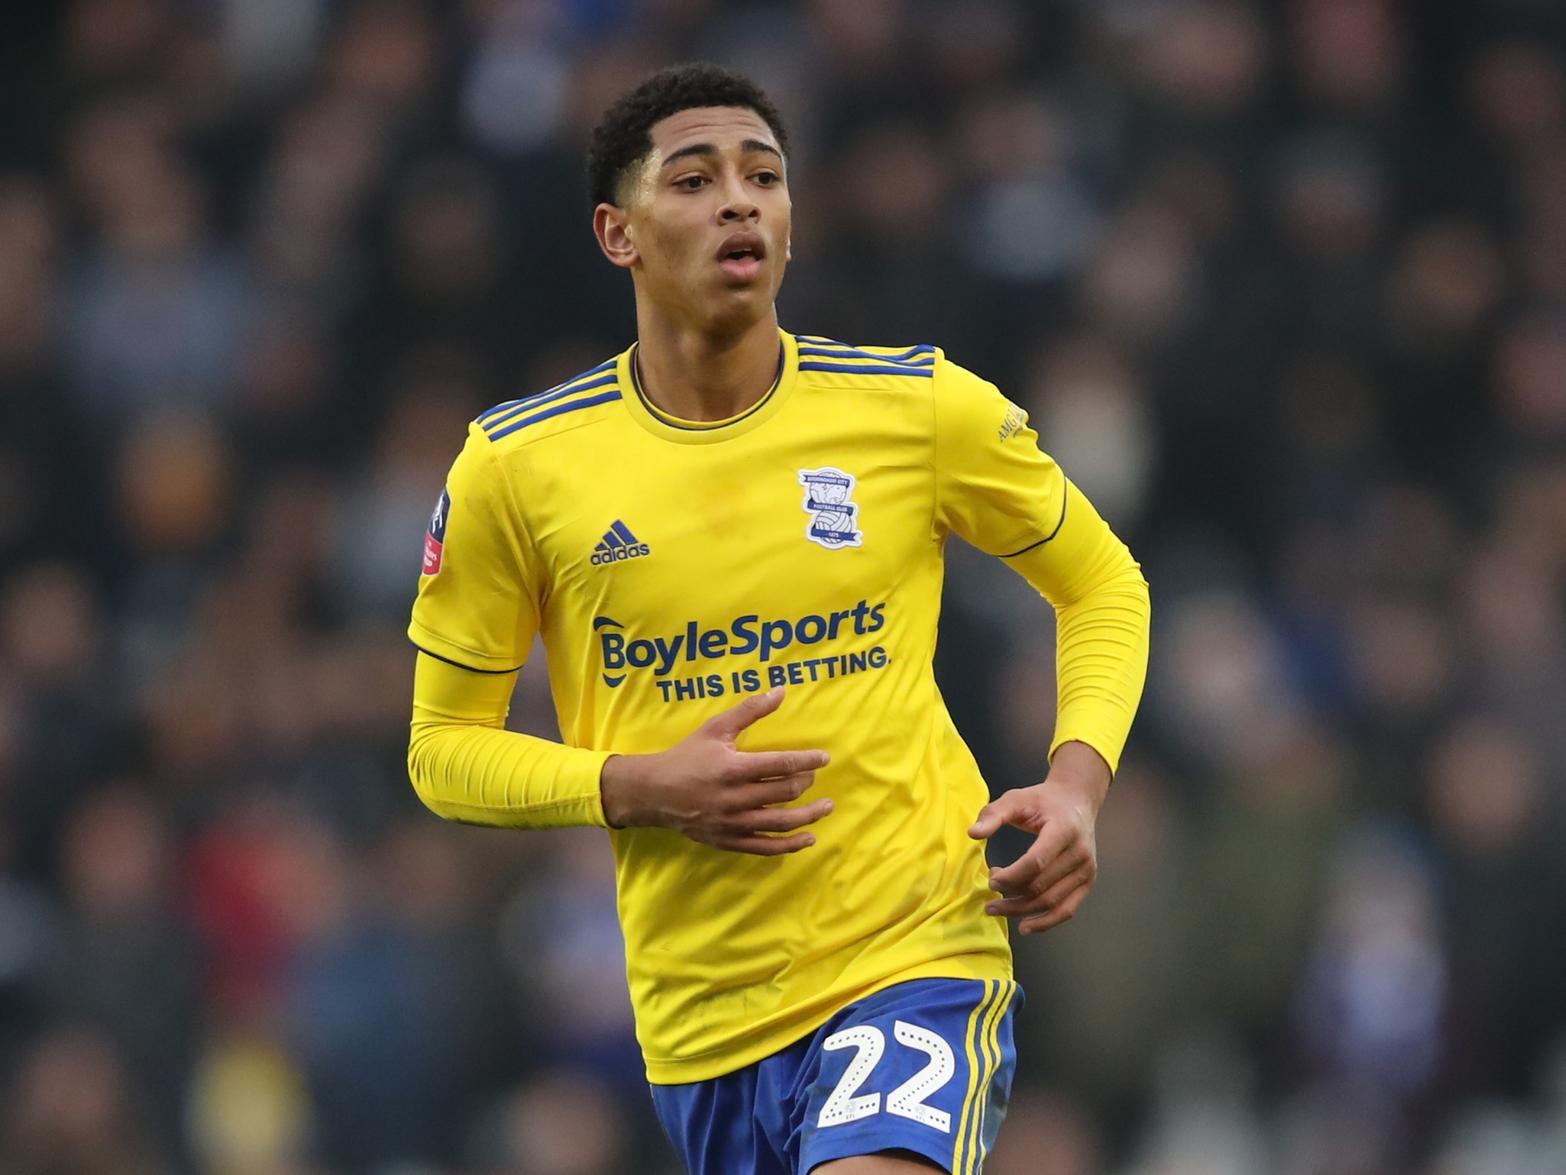 Liverpool are said to be the latest side to take an interest in Birmingham City starlet Jude Bellingham, and could beat Manchester United to the 30m-rated sensation this summer. (Daily Star)